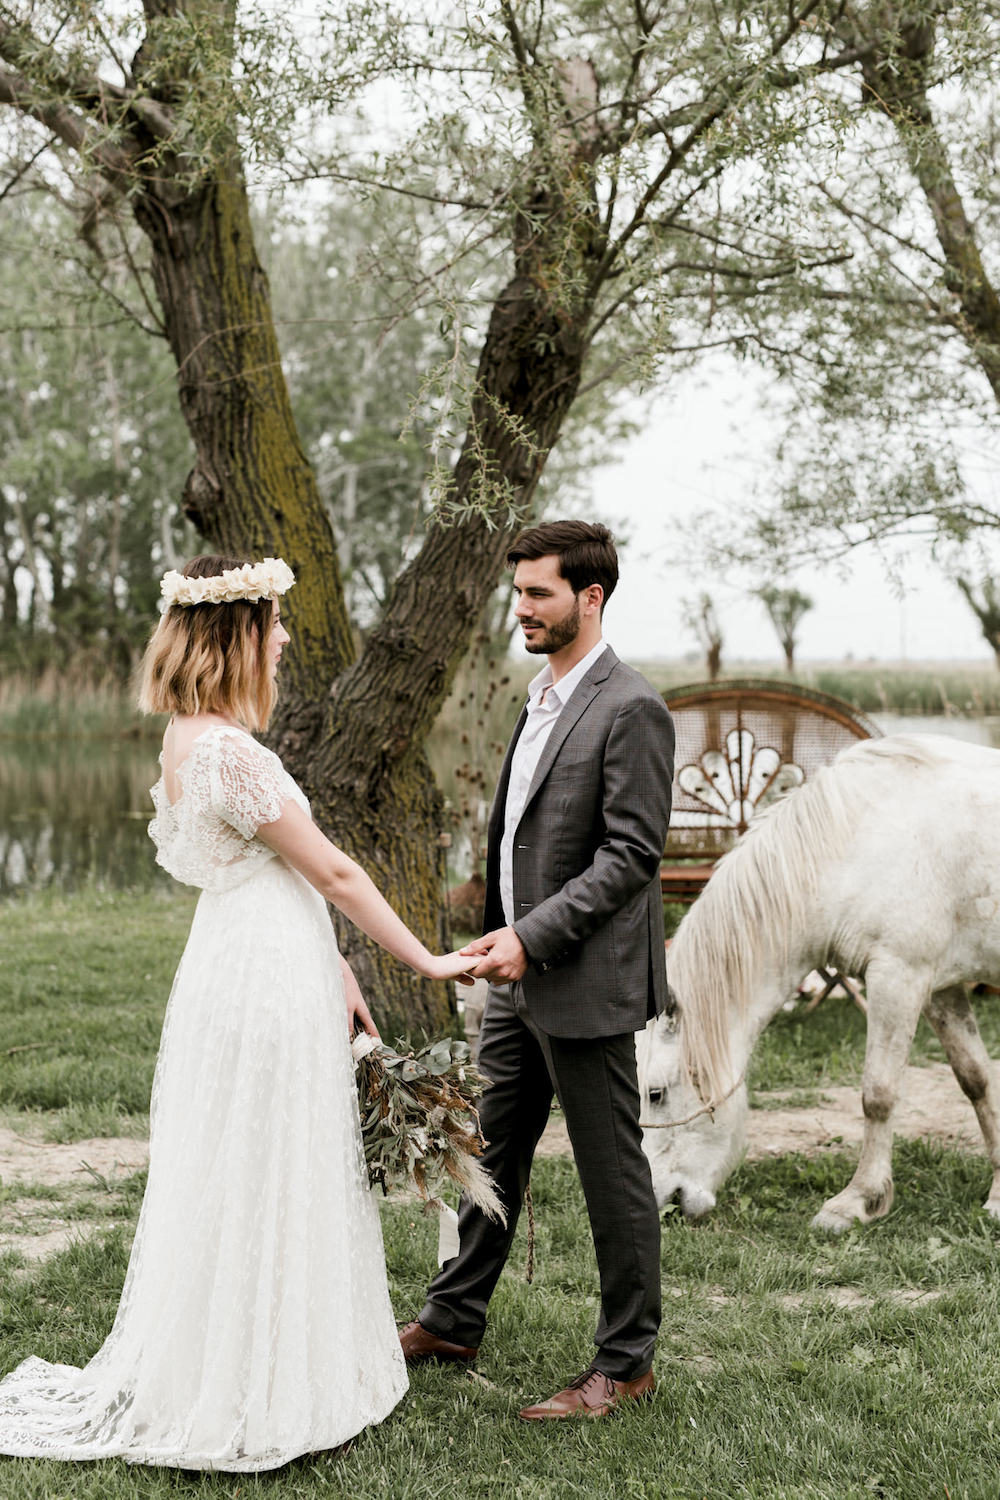 From Camargue with love - Blog Mariage Madame C